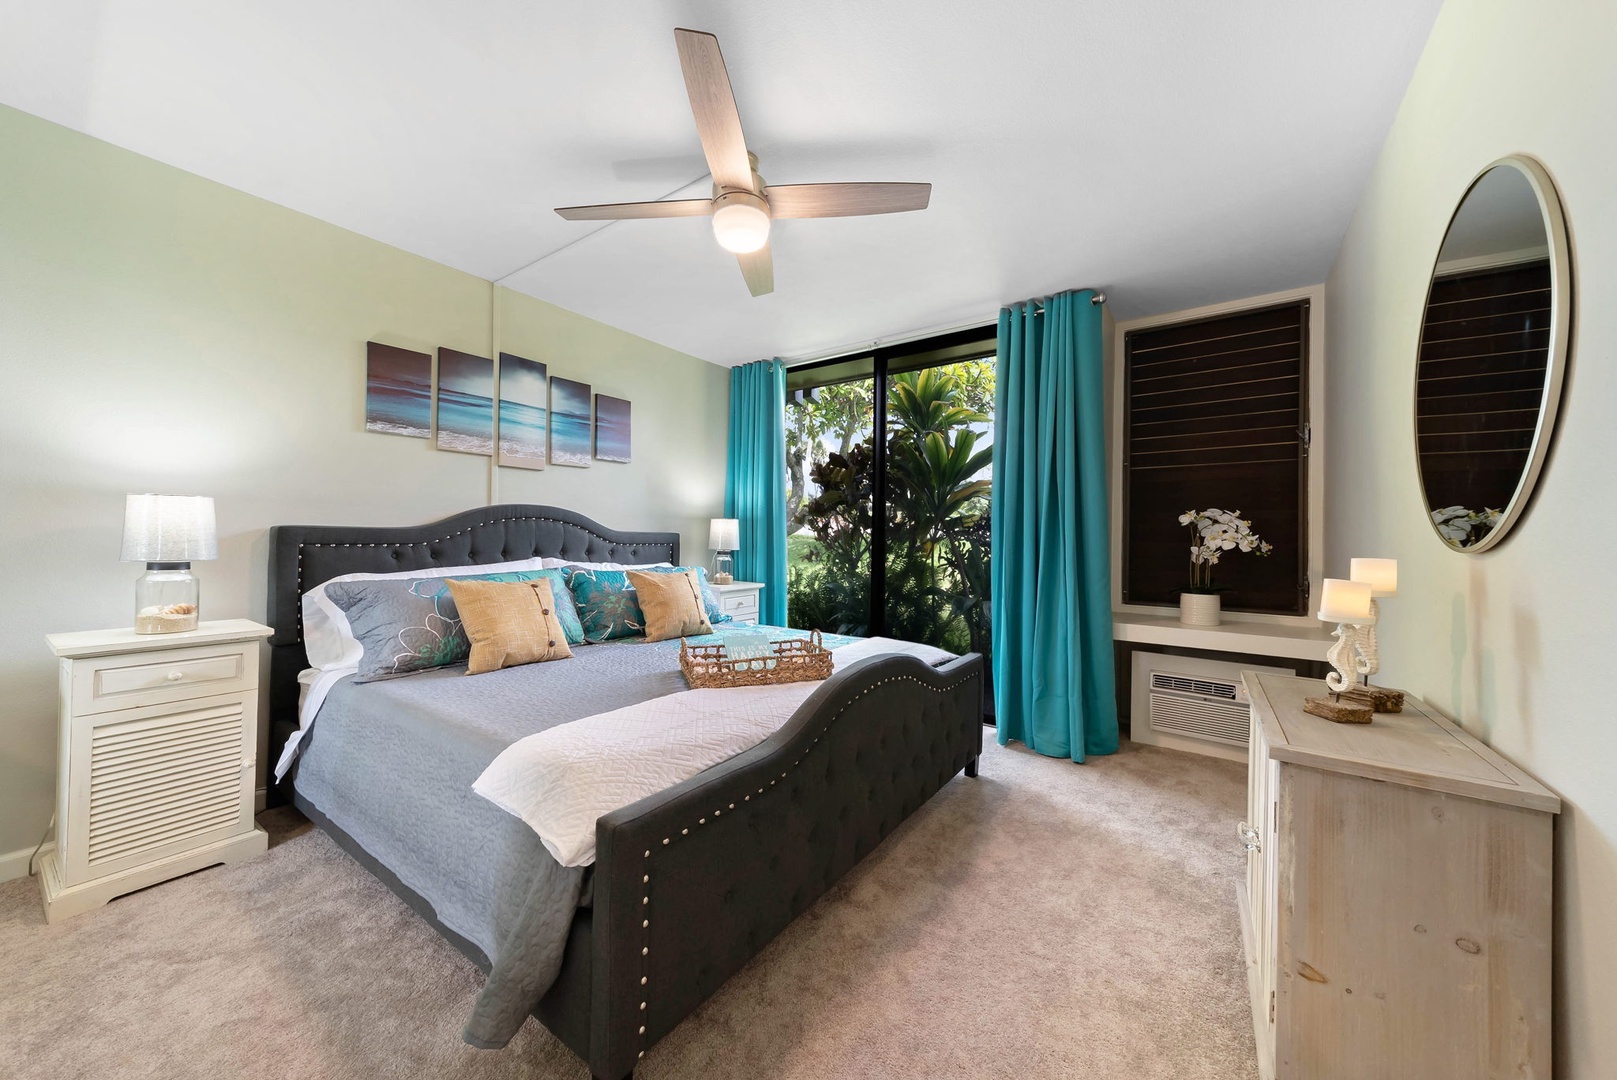 Kahuku Vacation Rentals, Turtle Bay's Kuilima Estates West #104 - The Primary Bedroom has a king bed